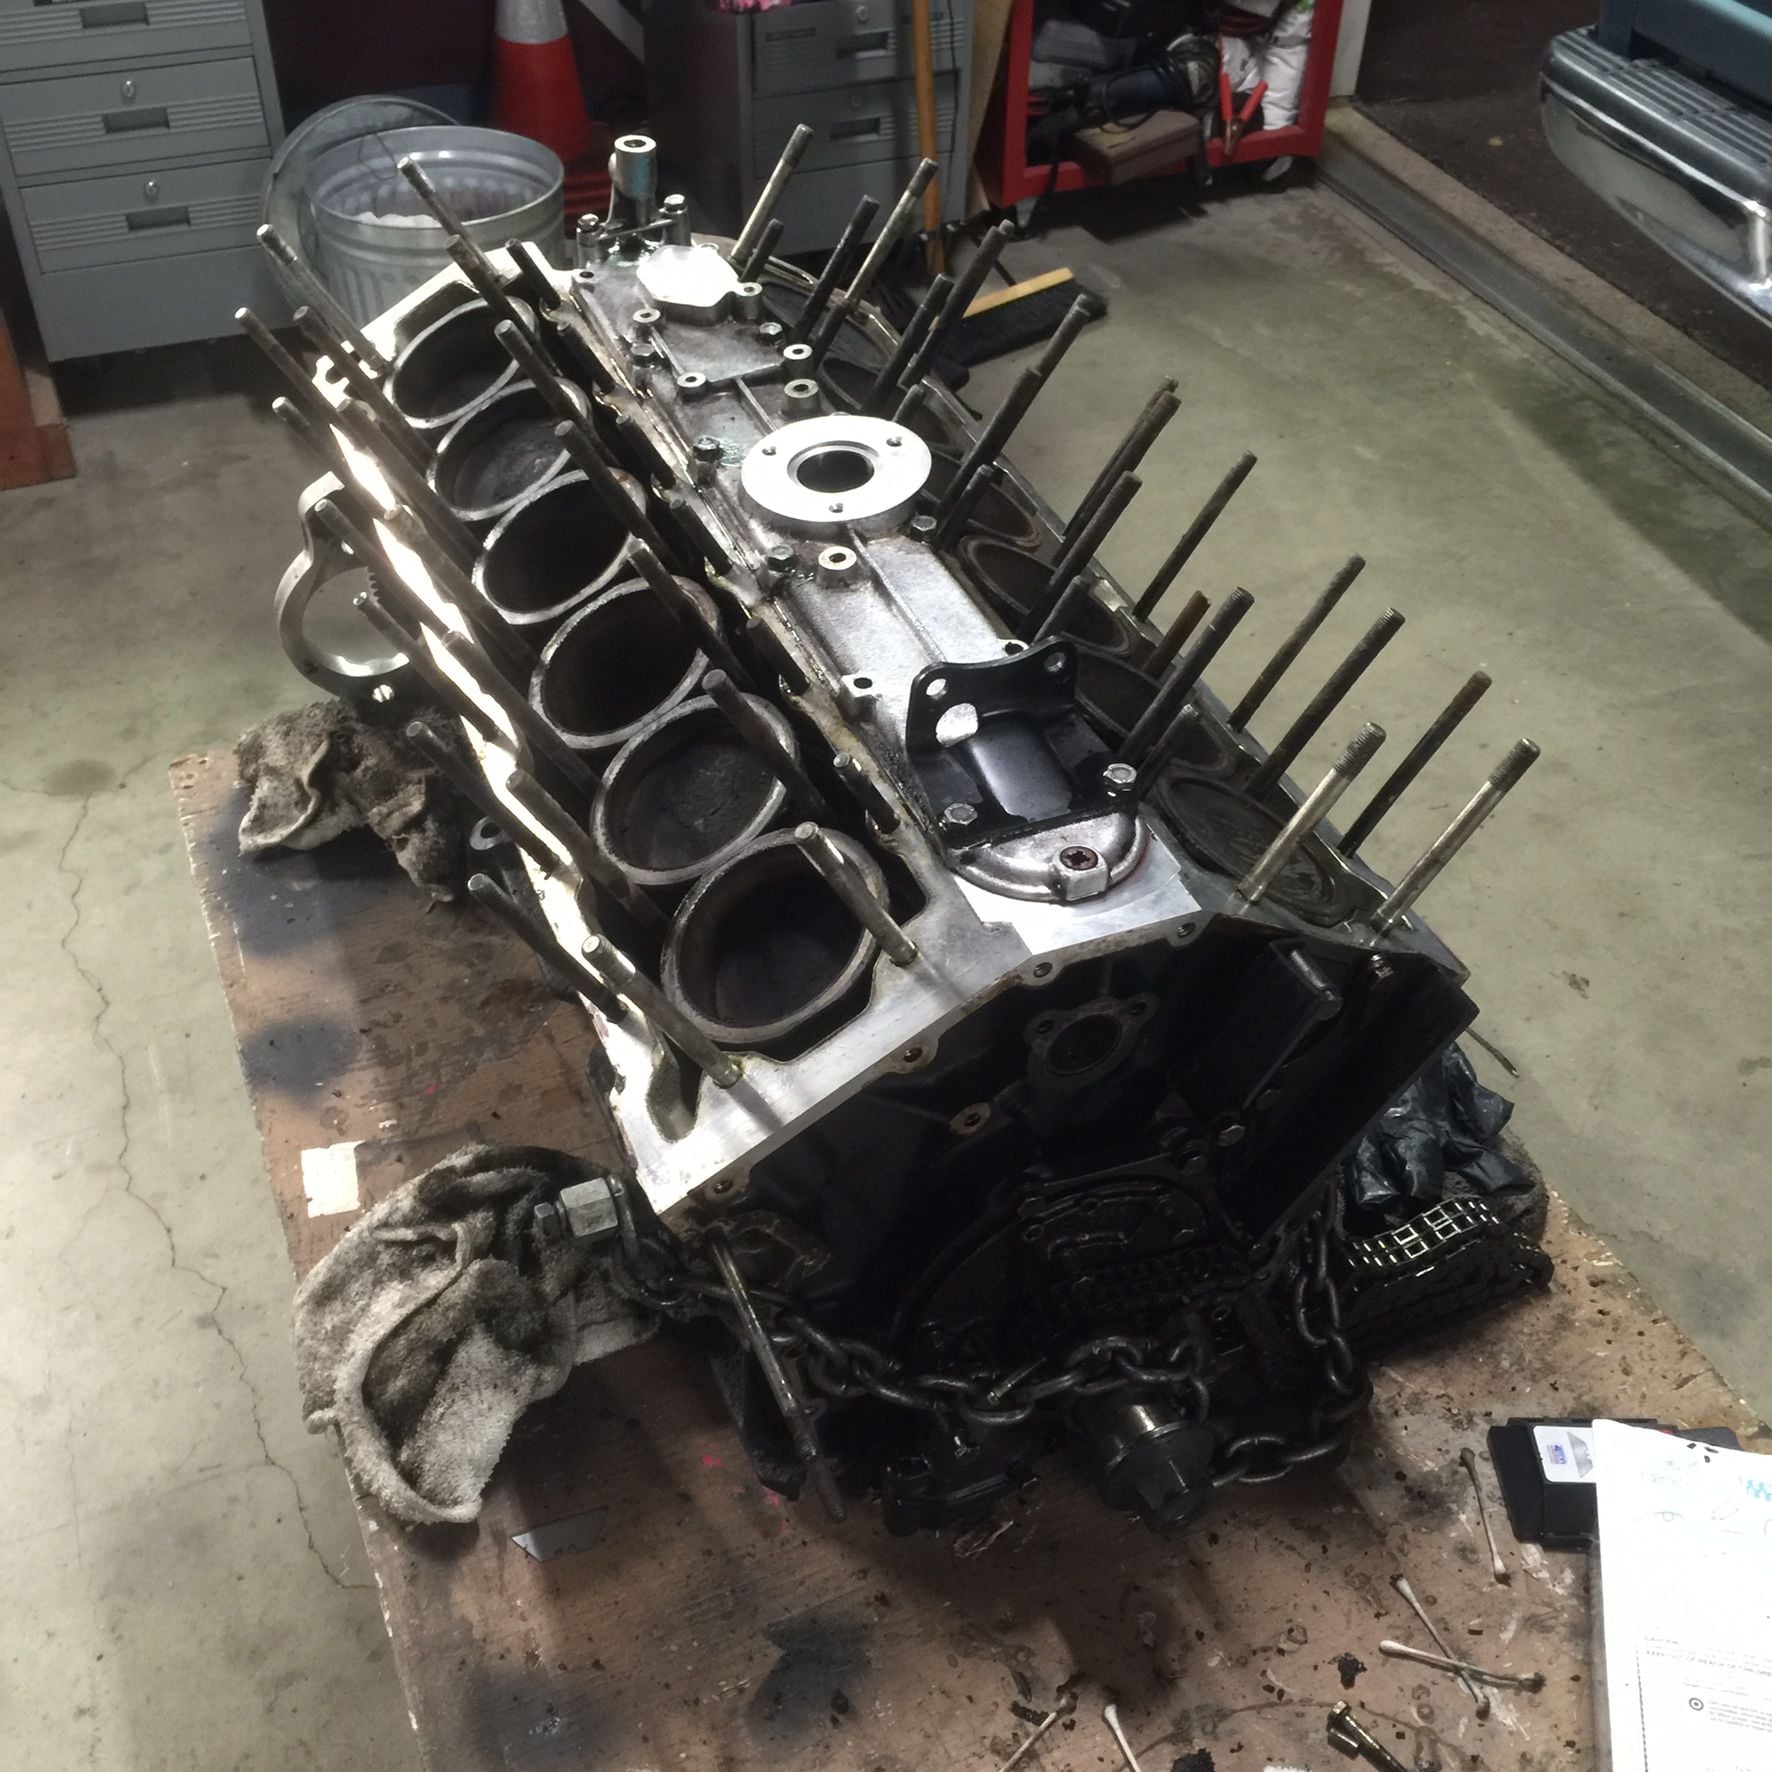 Engine - Internals - Xjs v12 5.3he - Used - 1980 to 1996 Jaguar XJS - Livermore, CA 94551, United States